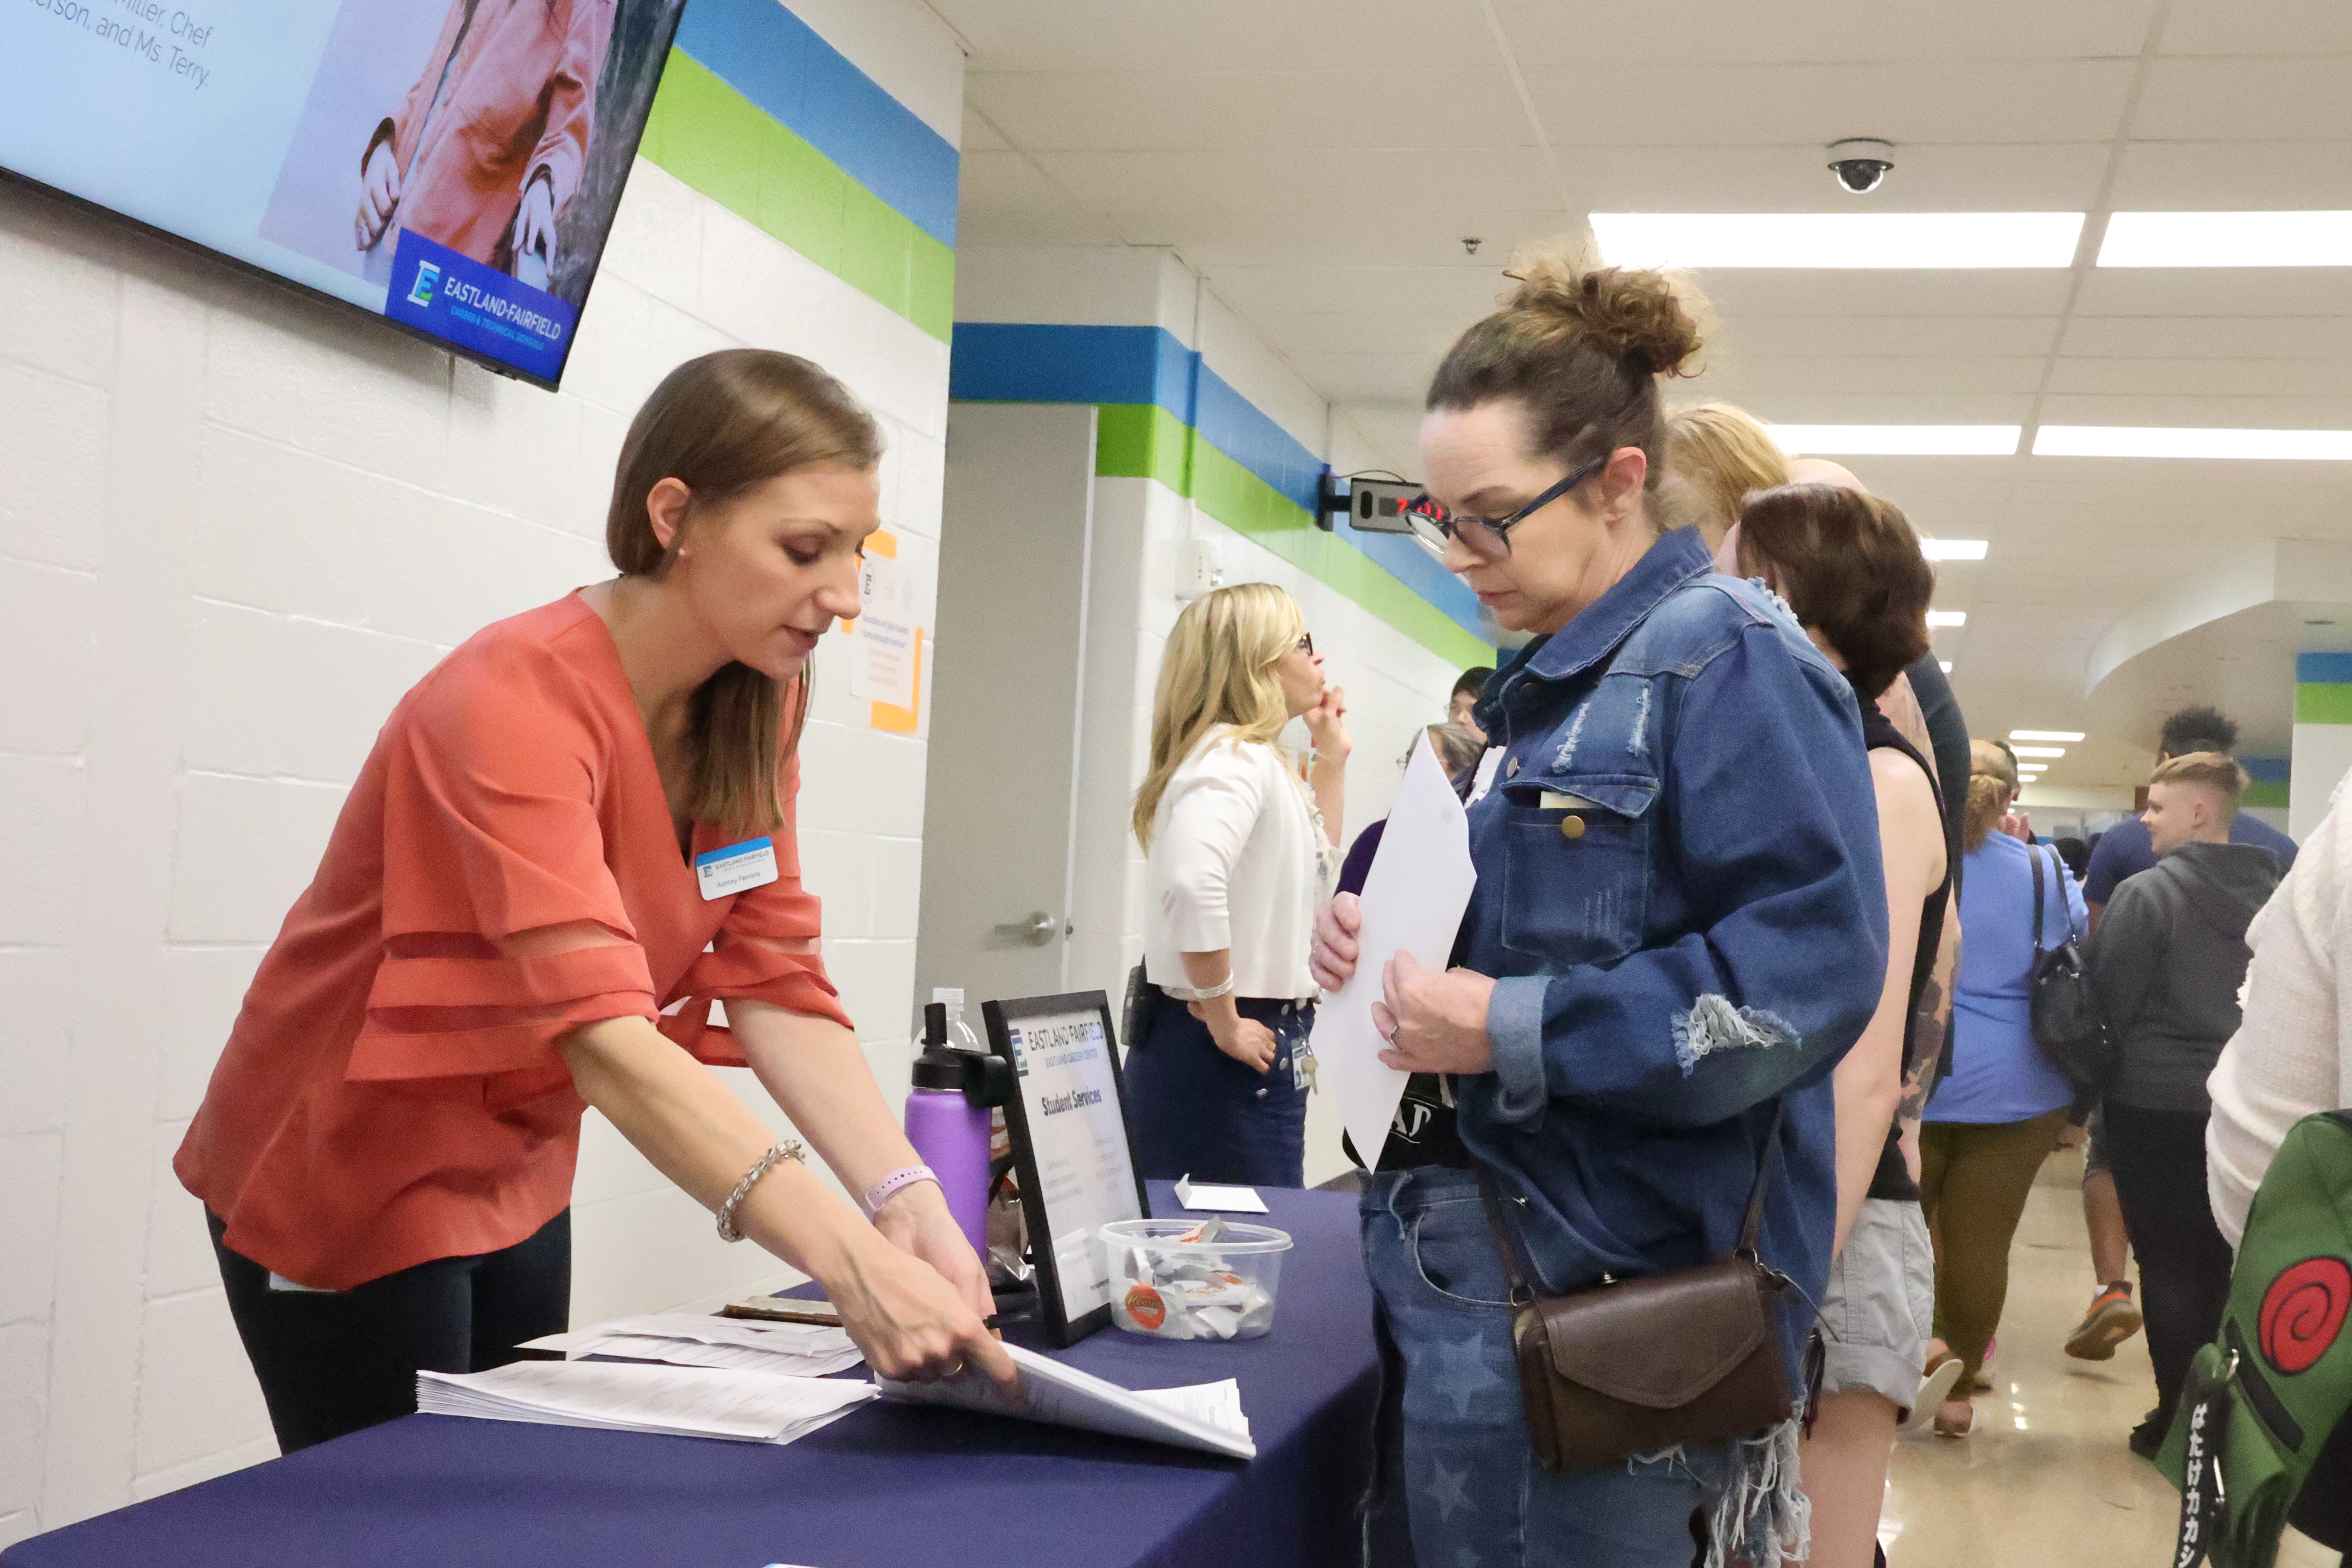 A school counselor answers questions from a prospective student's mother at a table.